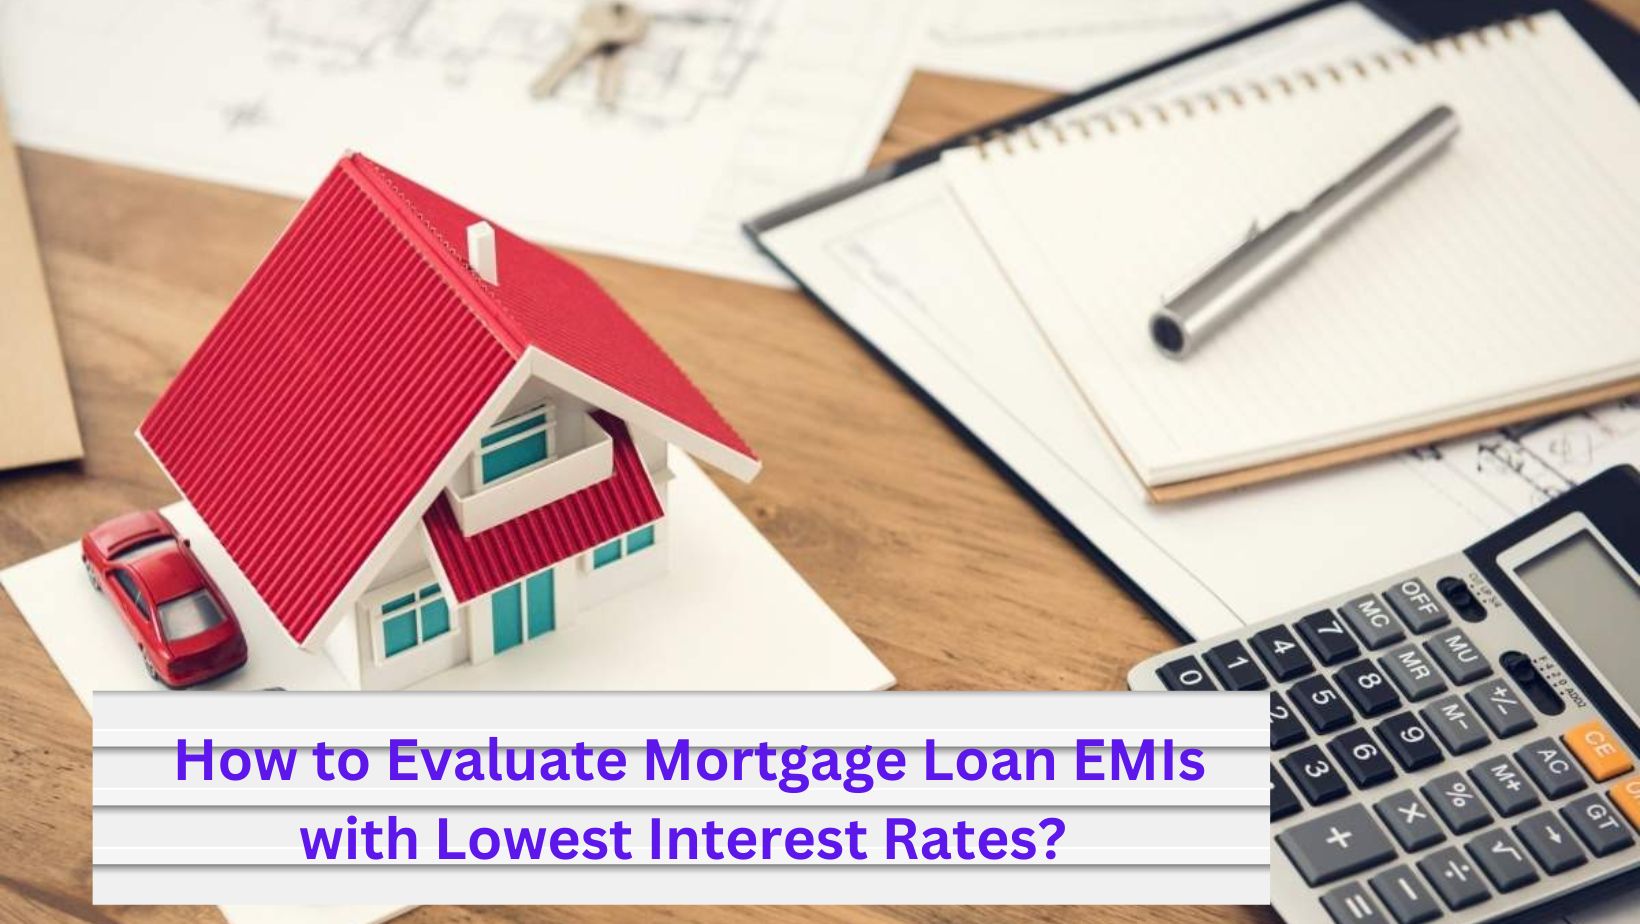 How to Evaluate Mortgage Loan EMIs with Lowest Interest Rates?